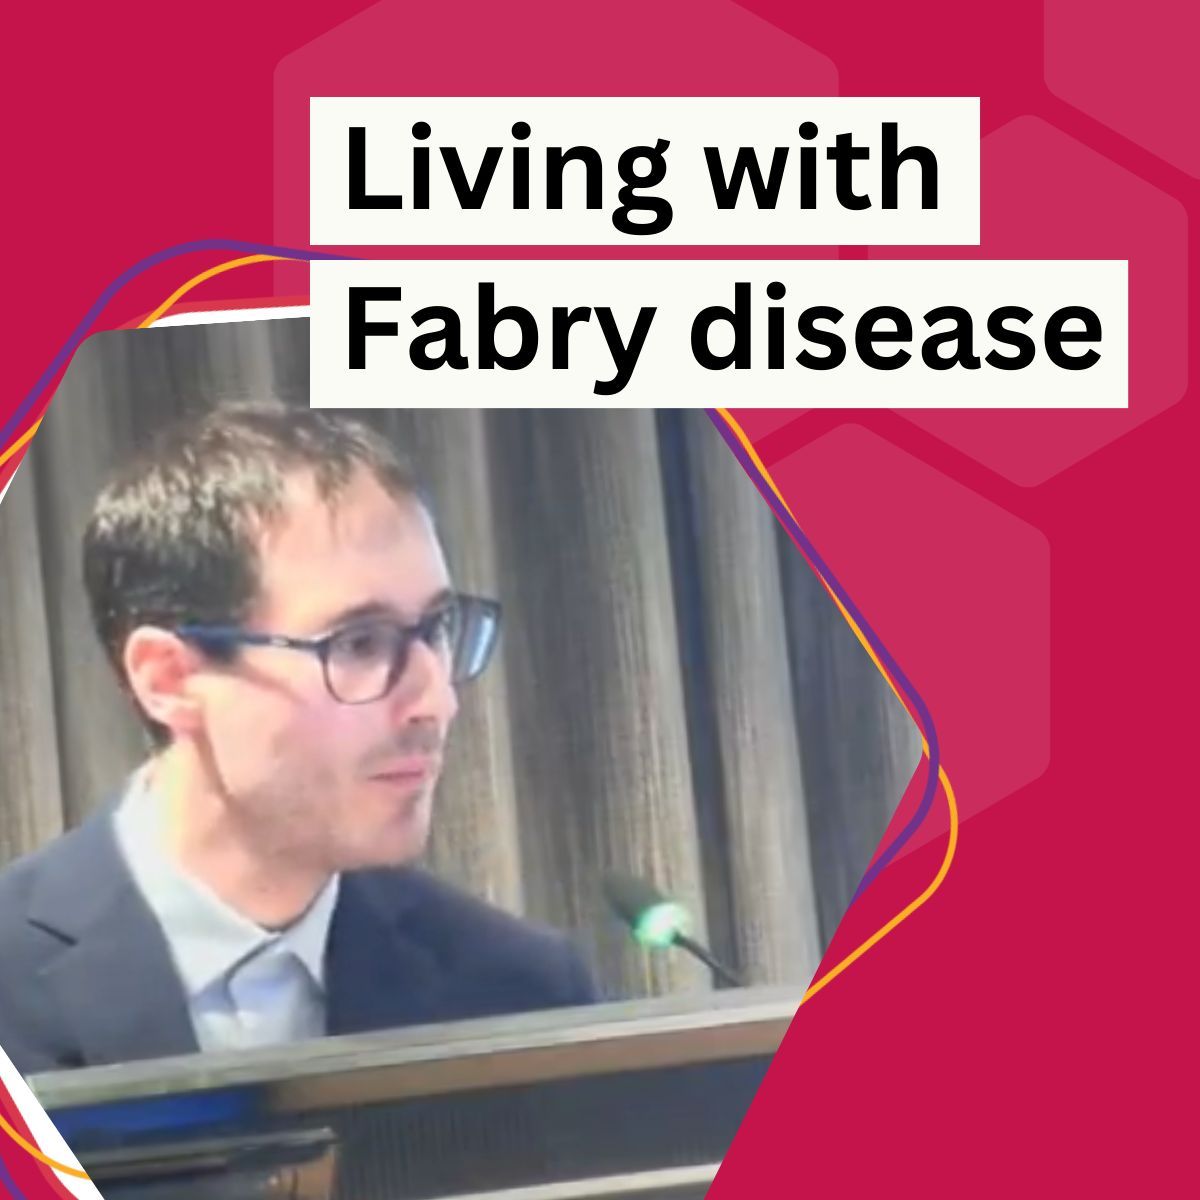 Dr Moreno-Martinez talks about living with Fabry disease and what it means to navigate a rare genetic condition at the Fabry Matters Conference earlier this year. Find out about living with Fabry disease: buff.ly/3U2VdQz #WhatIsFabry #FabryAwareness